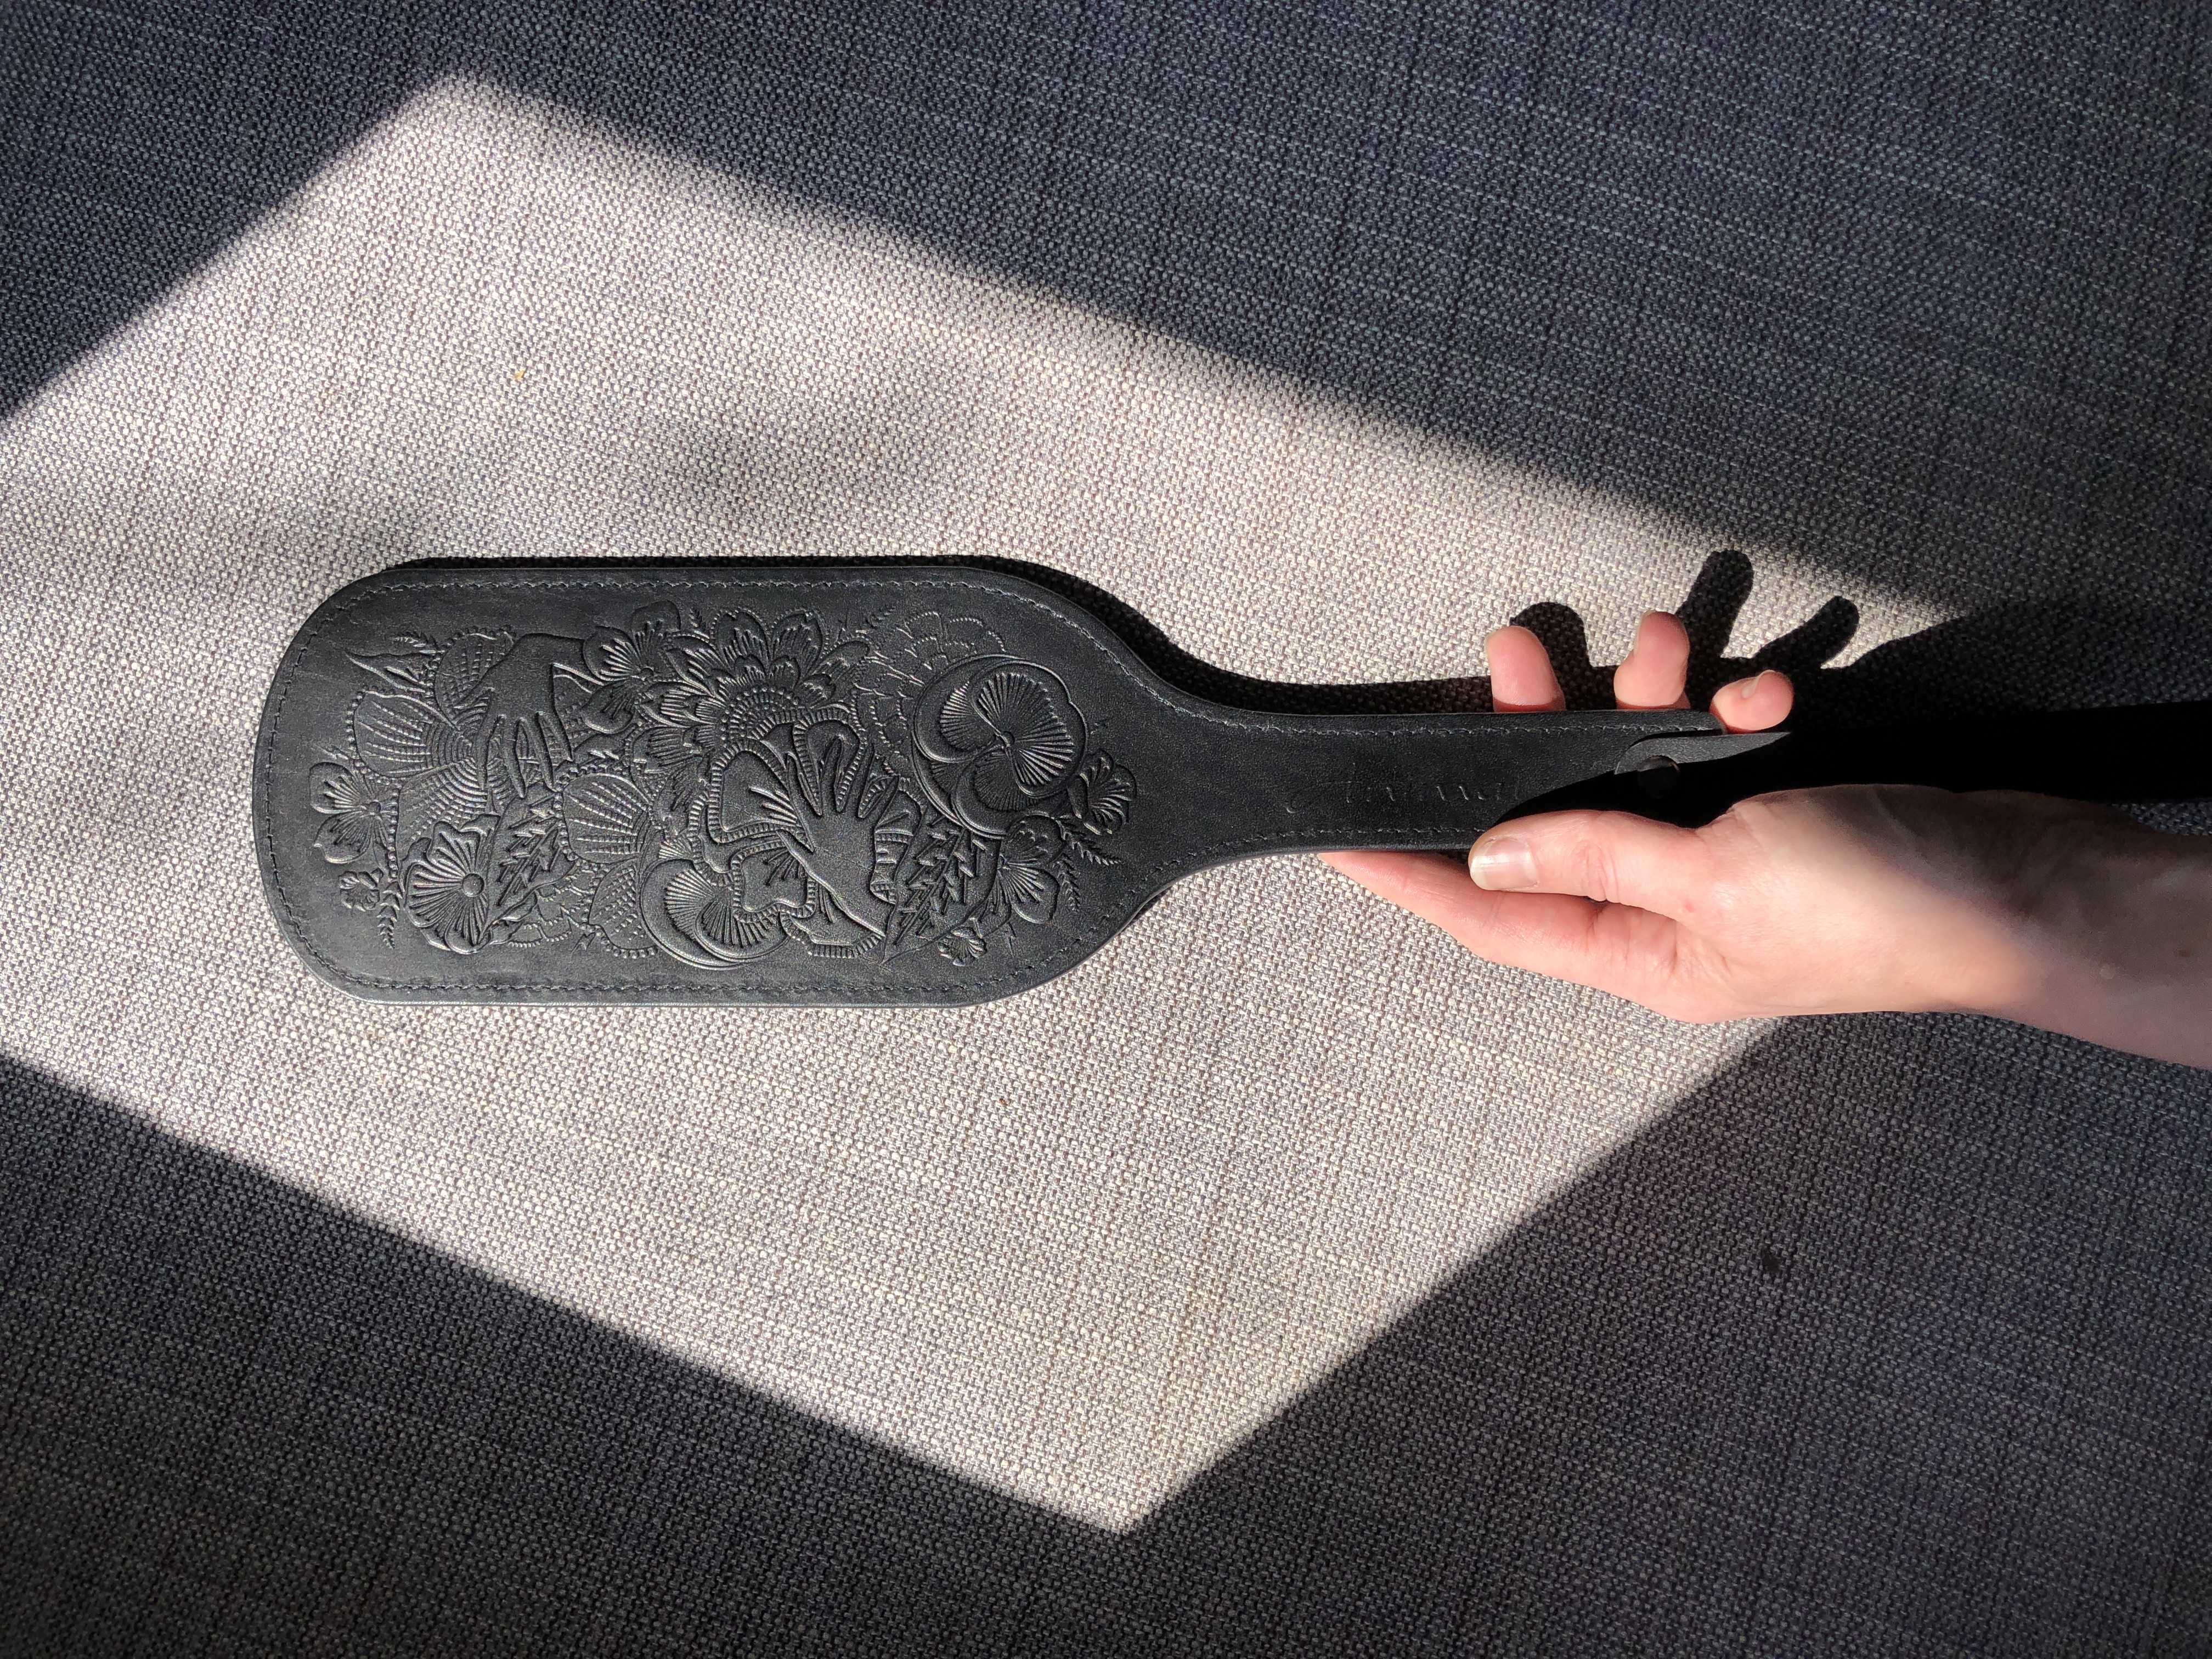 A black leather paddle with an intricate design on it that features hands, flowers, and fruits. A hand is holding the paddle on a textured gray background. Light is seeping into the frame and creates a diamond shape, which frames the paddle. 